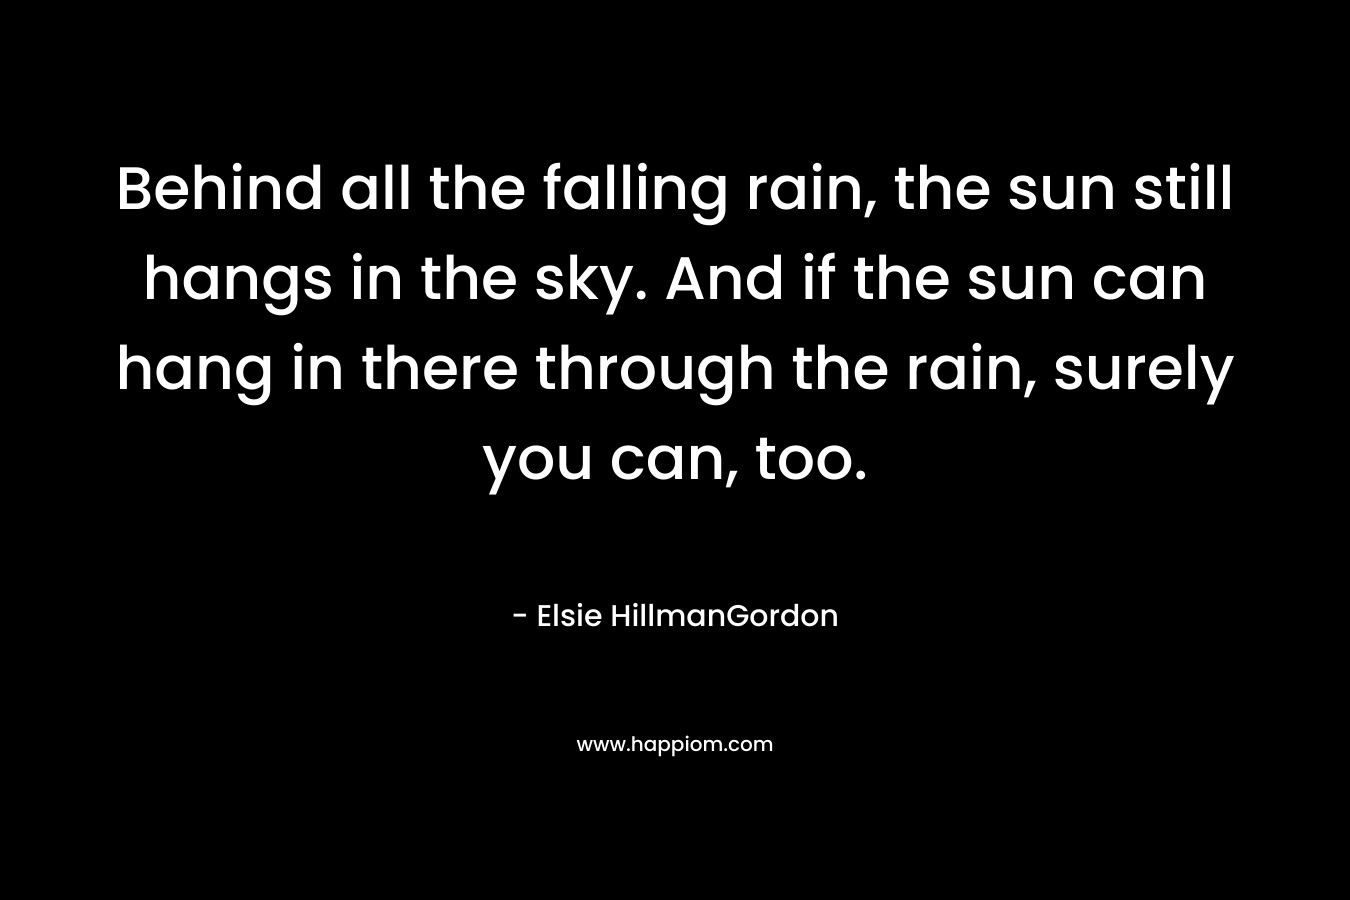 Behind all the falling rain, the sun still hangs in the sky. And if the sun can hang in there through the rain, surely you can, too.